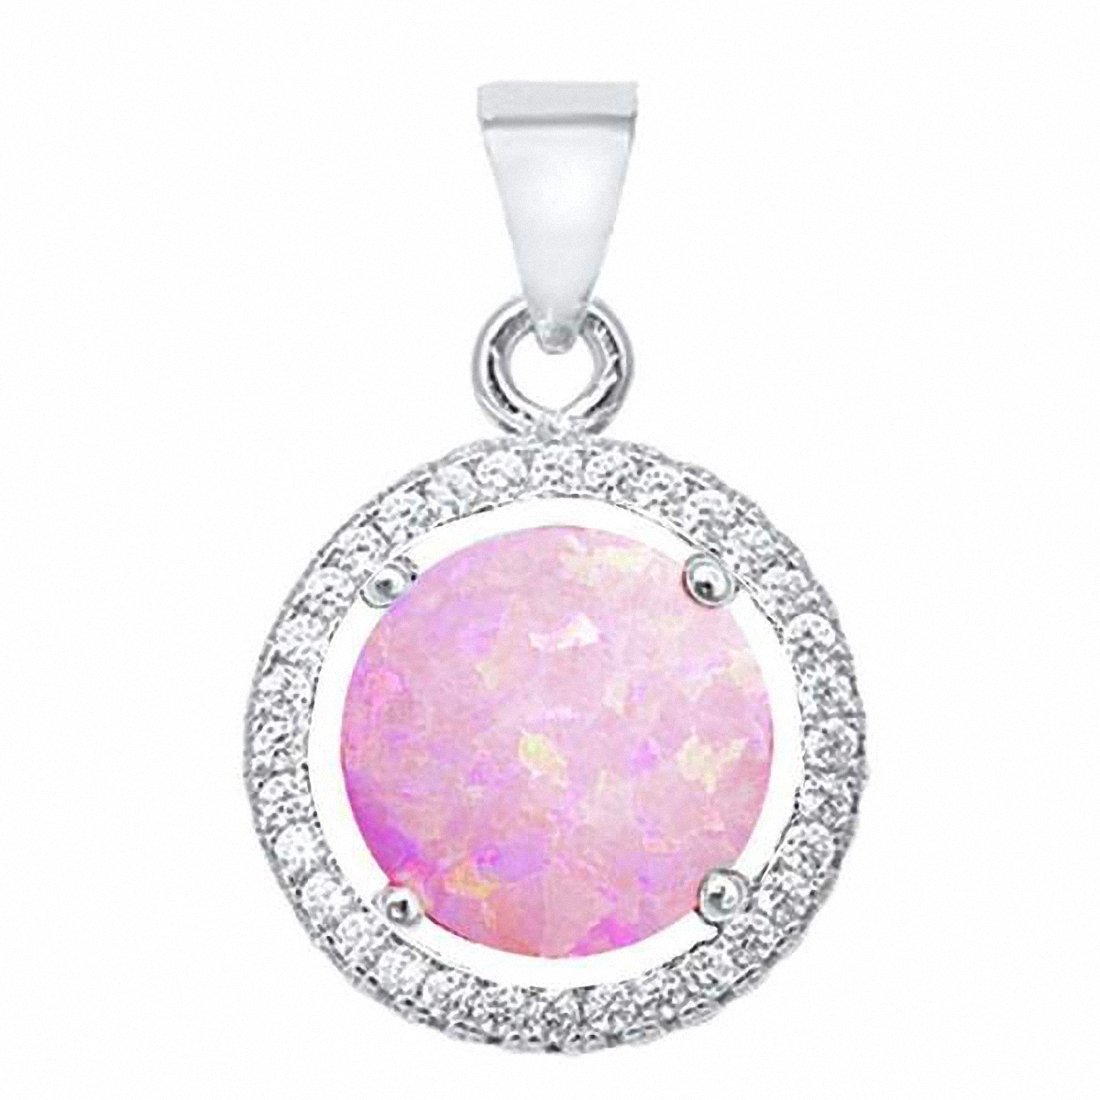 Halo Wedding Pendant Round Created White Opal Cubic Zirconia 925 Sterling Silver